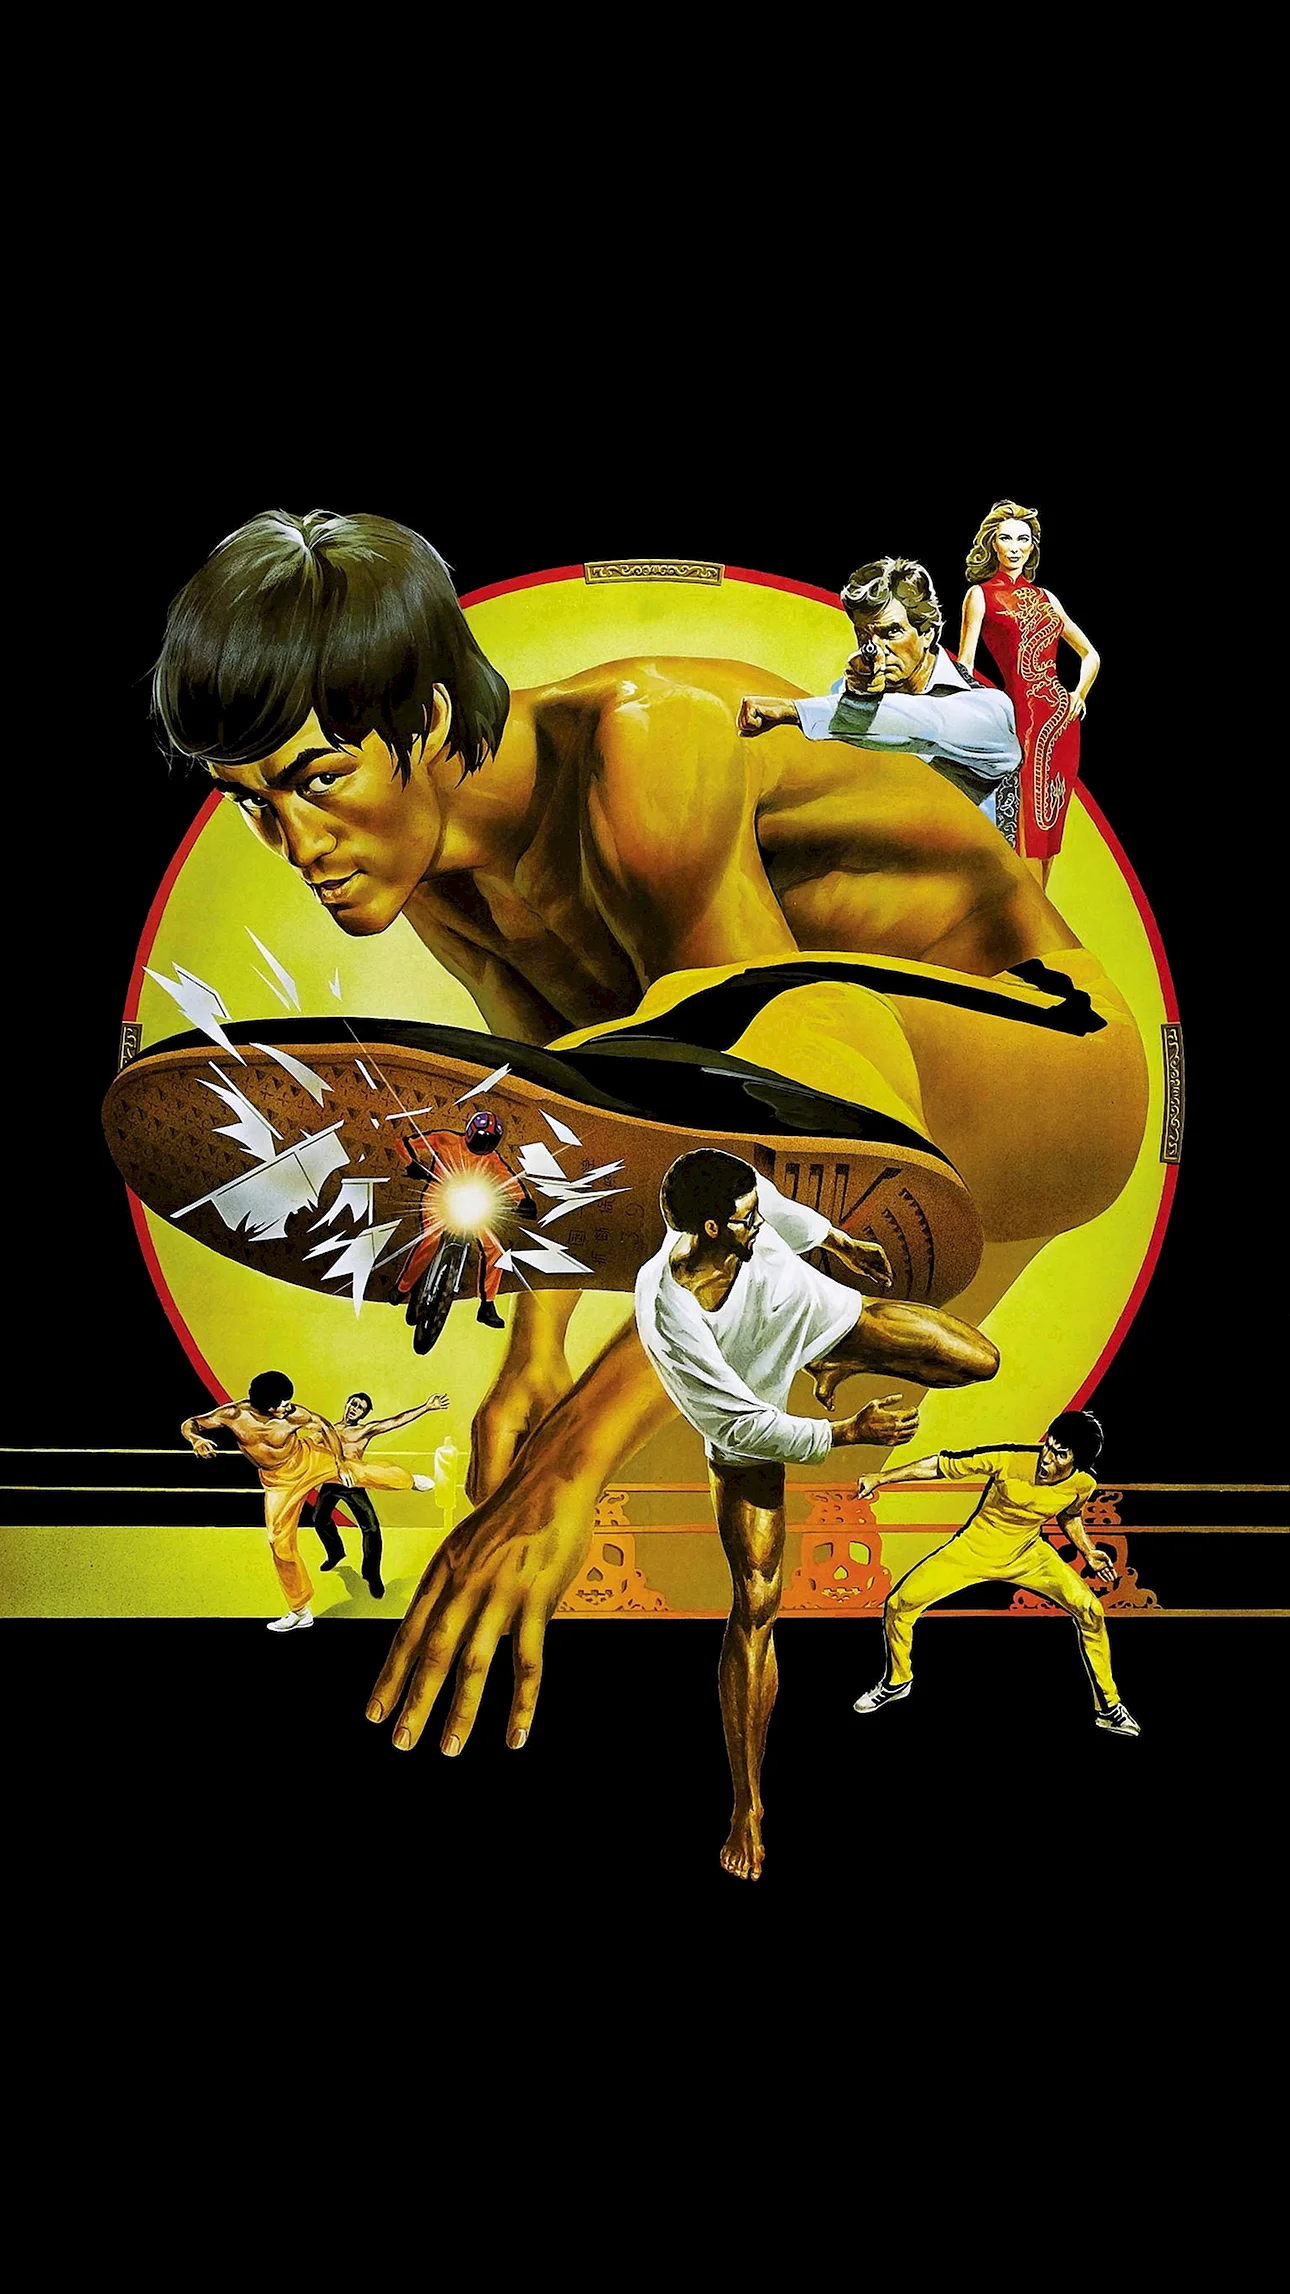 Bruce Lee Death Posters Wallpaper For iPhone